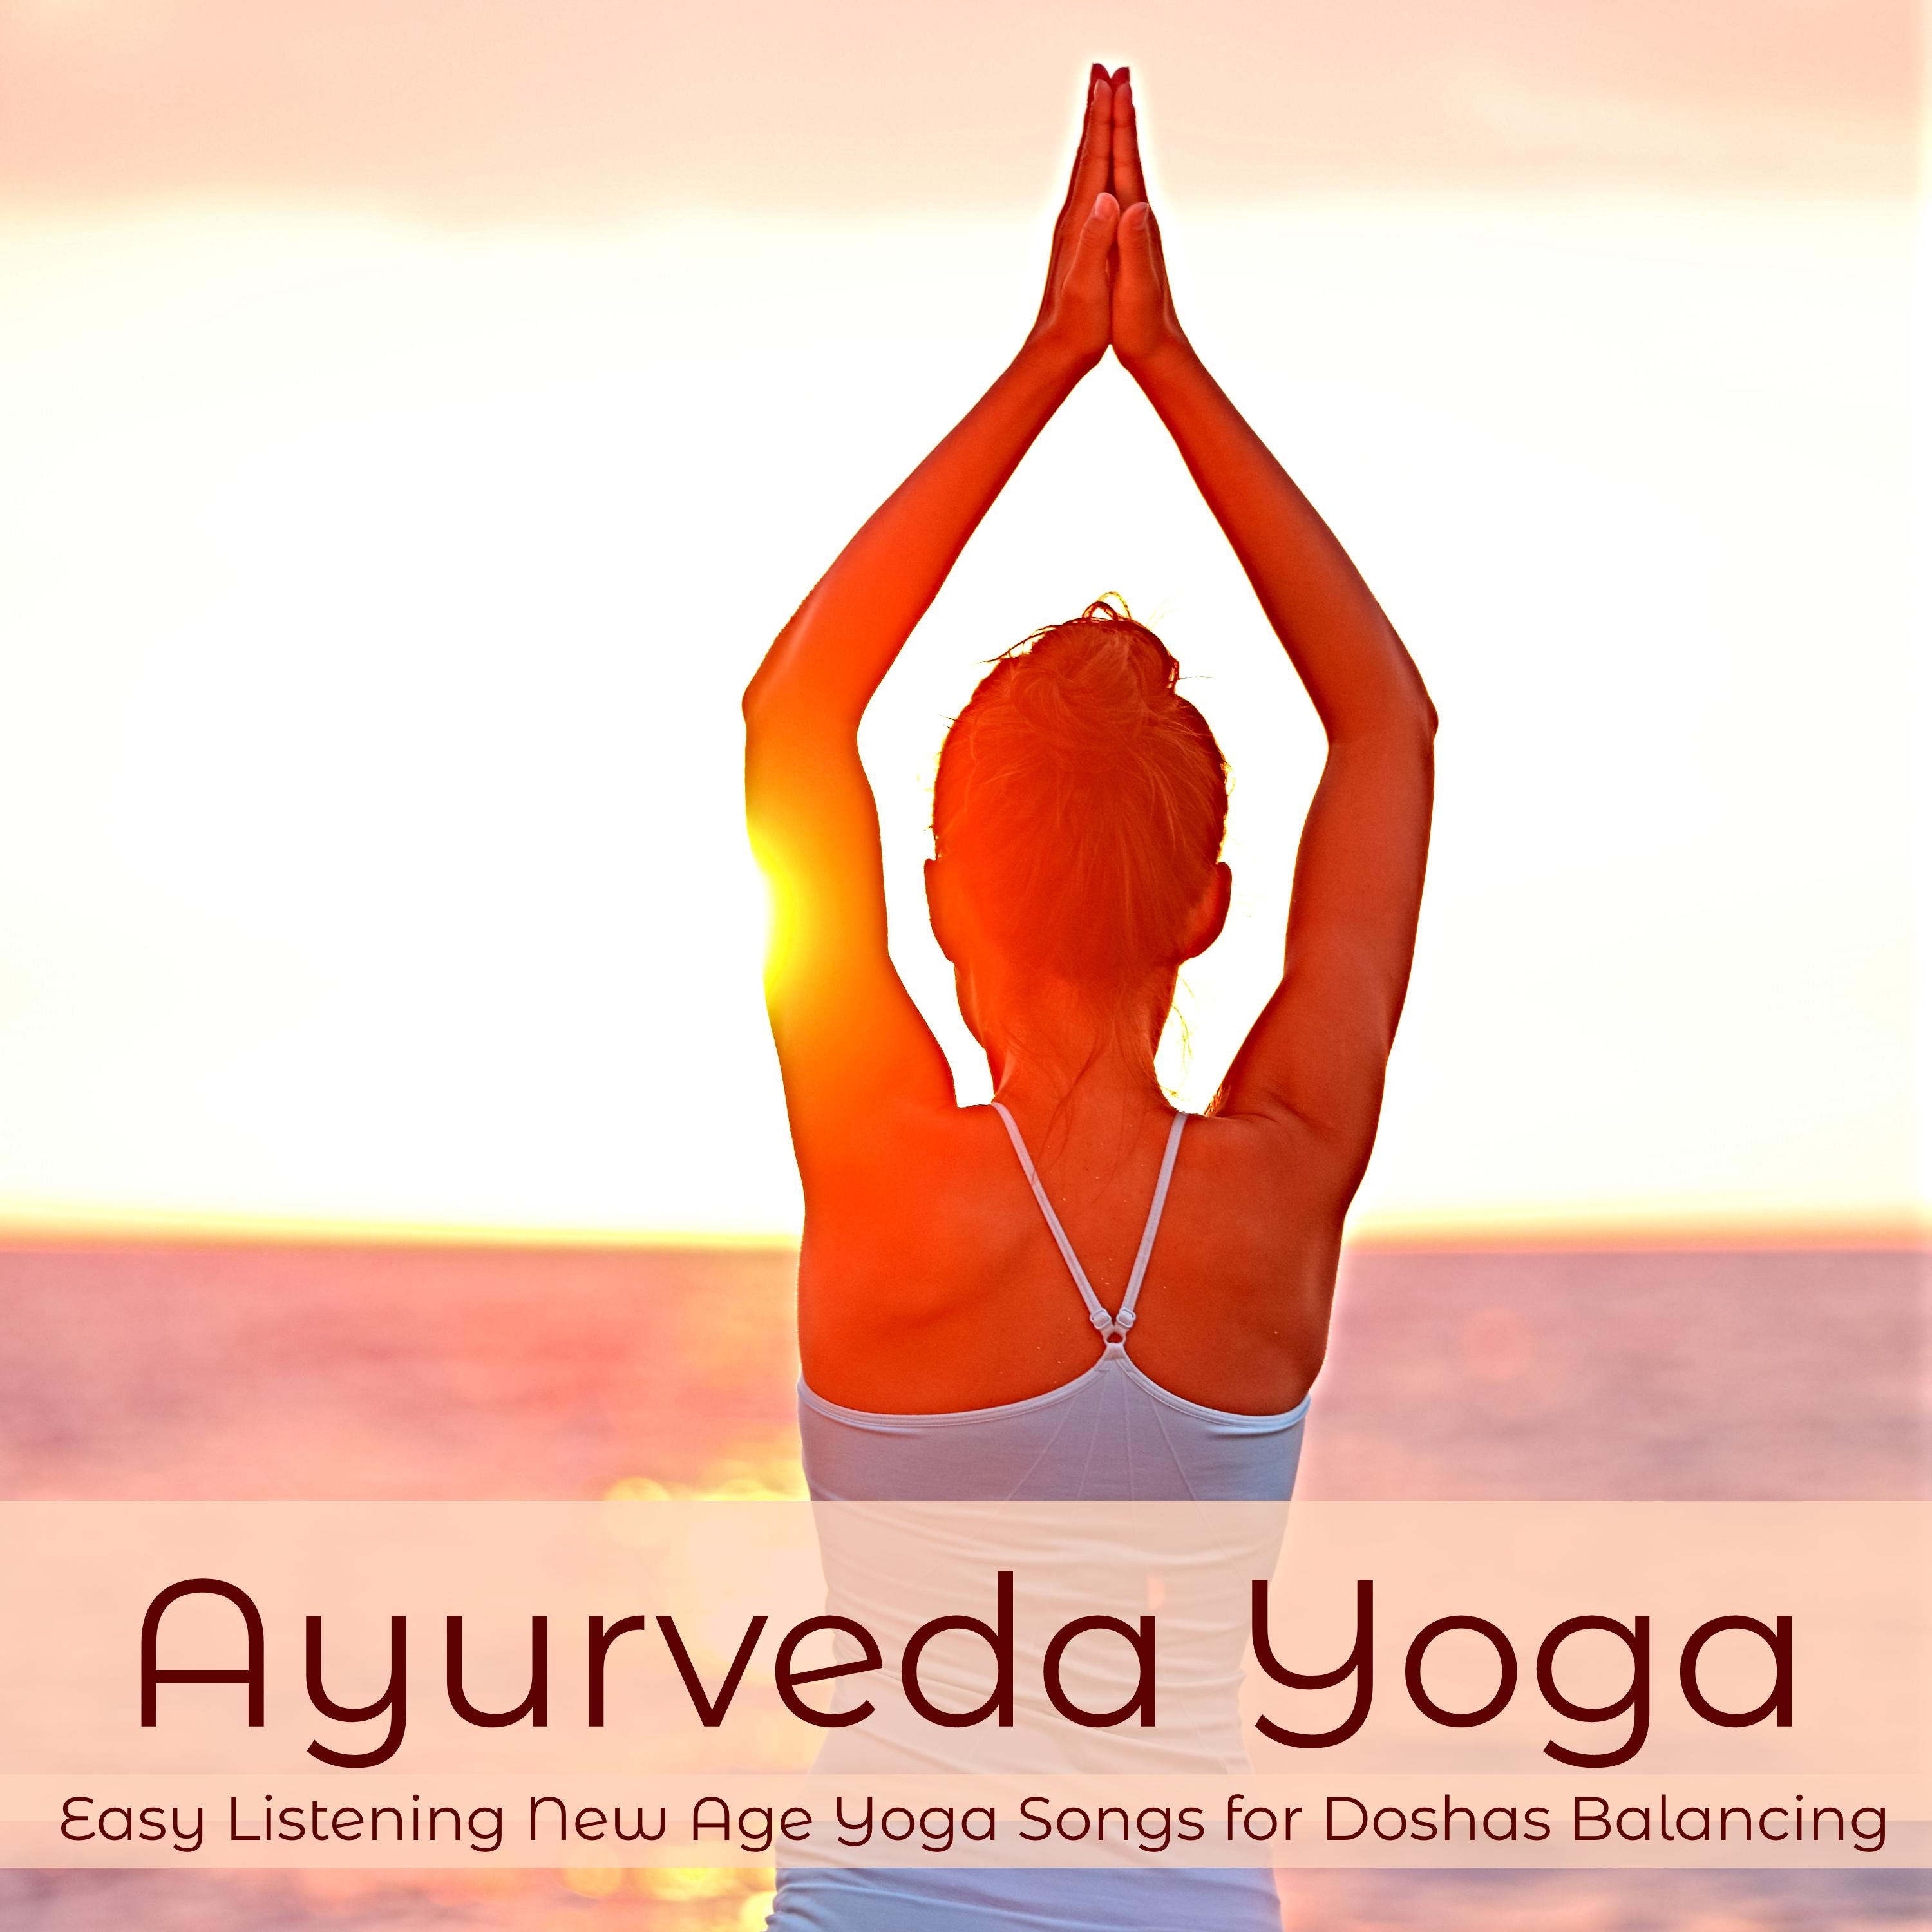 Slow Sounds - Peaceful Music for Ayurvedic Treatments